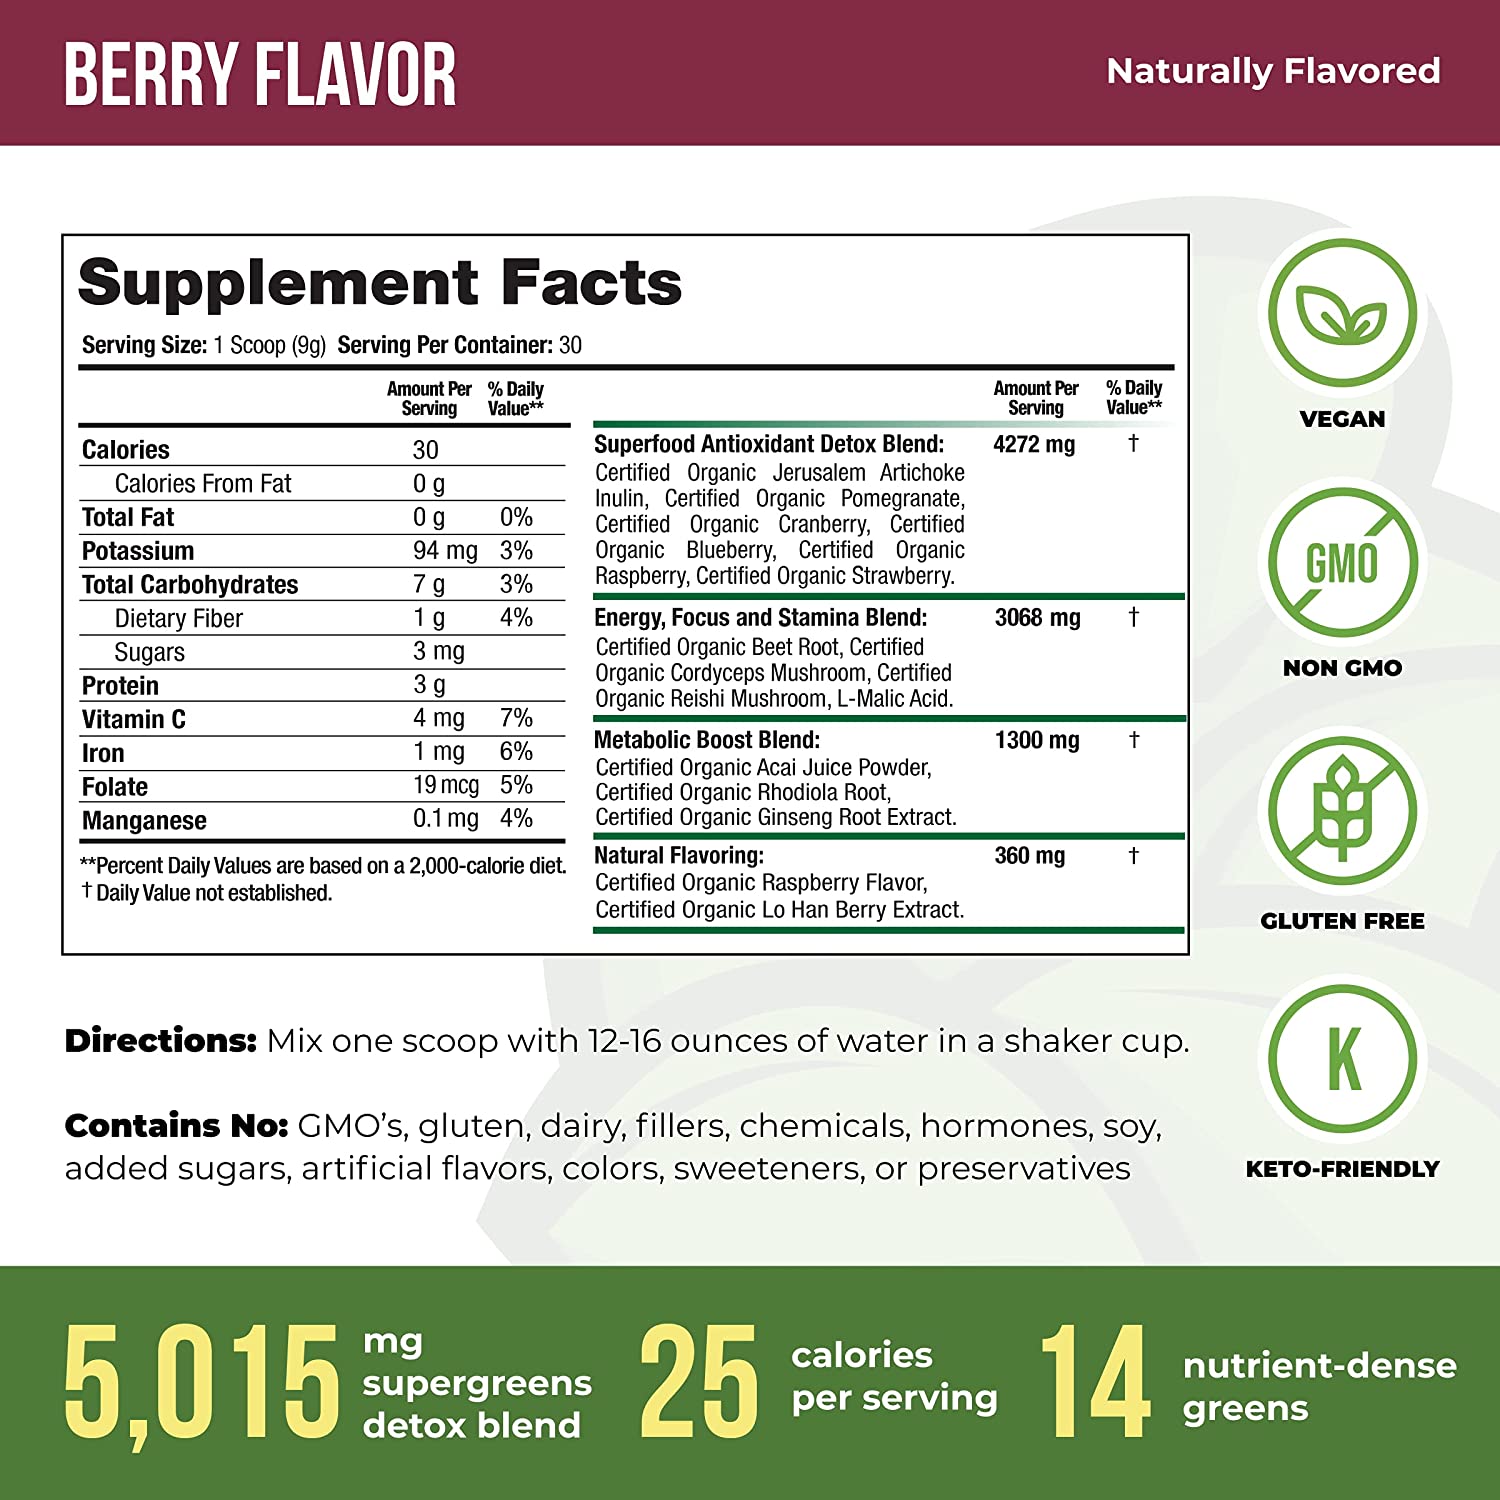 Superfood Reds - Acai Berry - 30 Servings